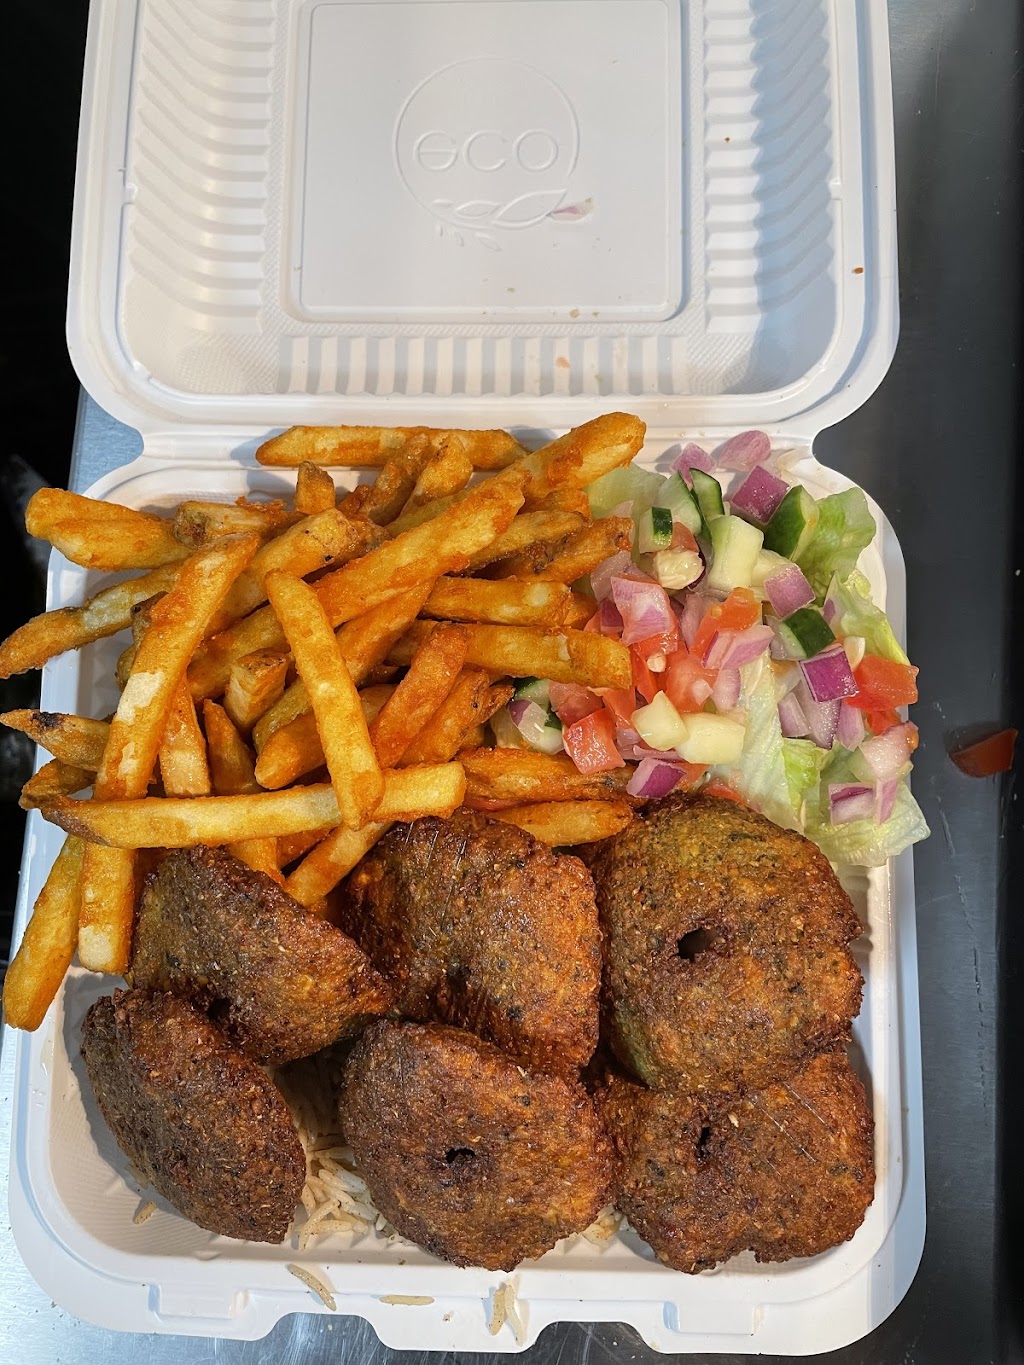 Halal Munchies | 7845 Springfield Blvd, Queens, NY 11364 | Phone: (347) 502-7393